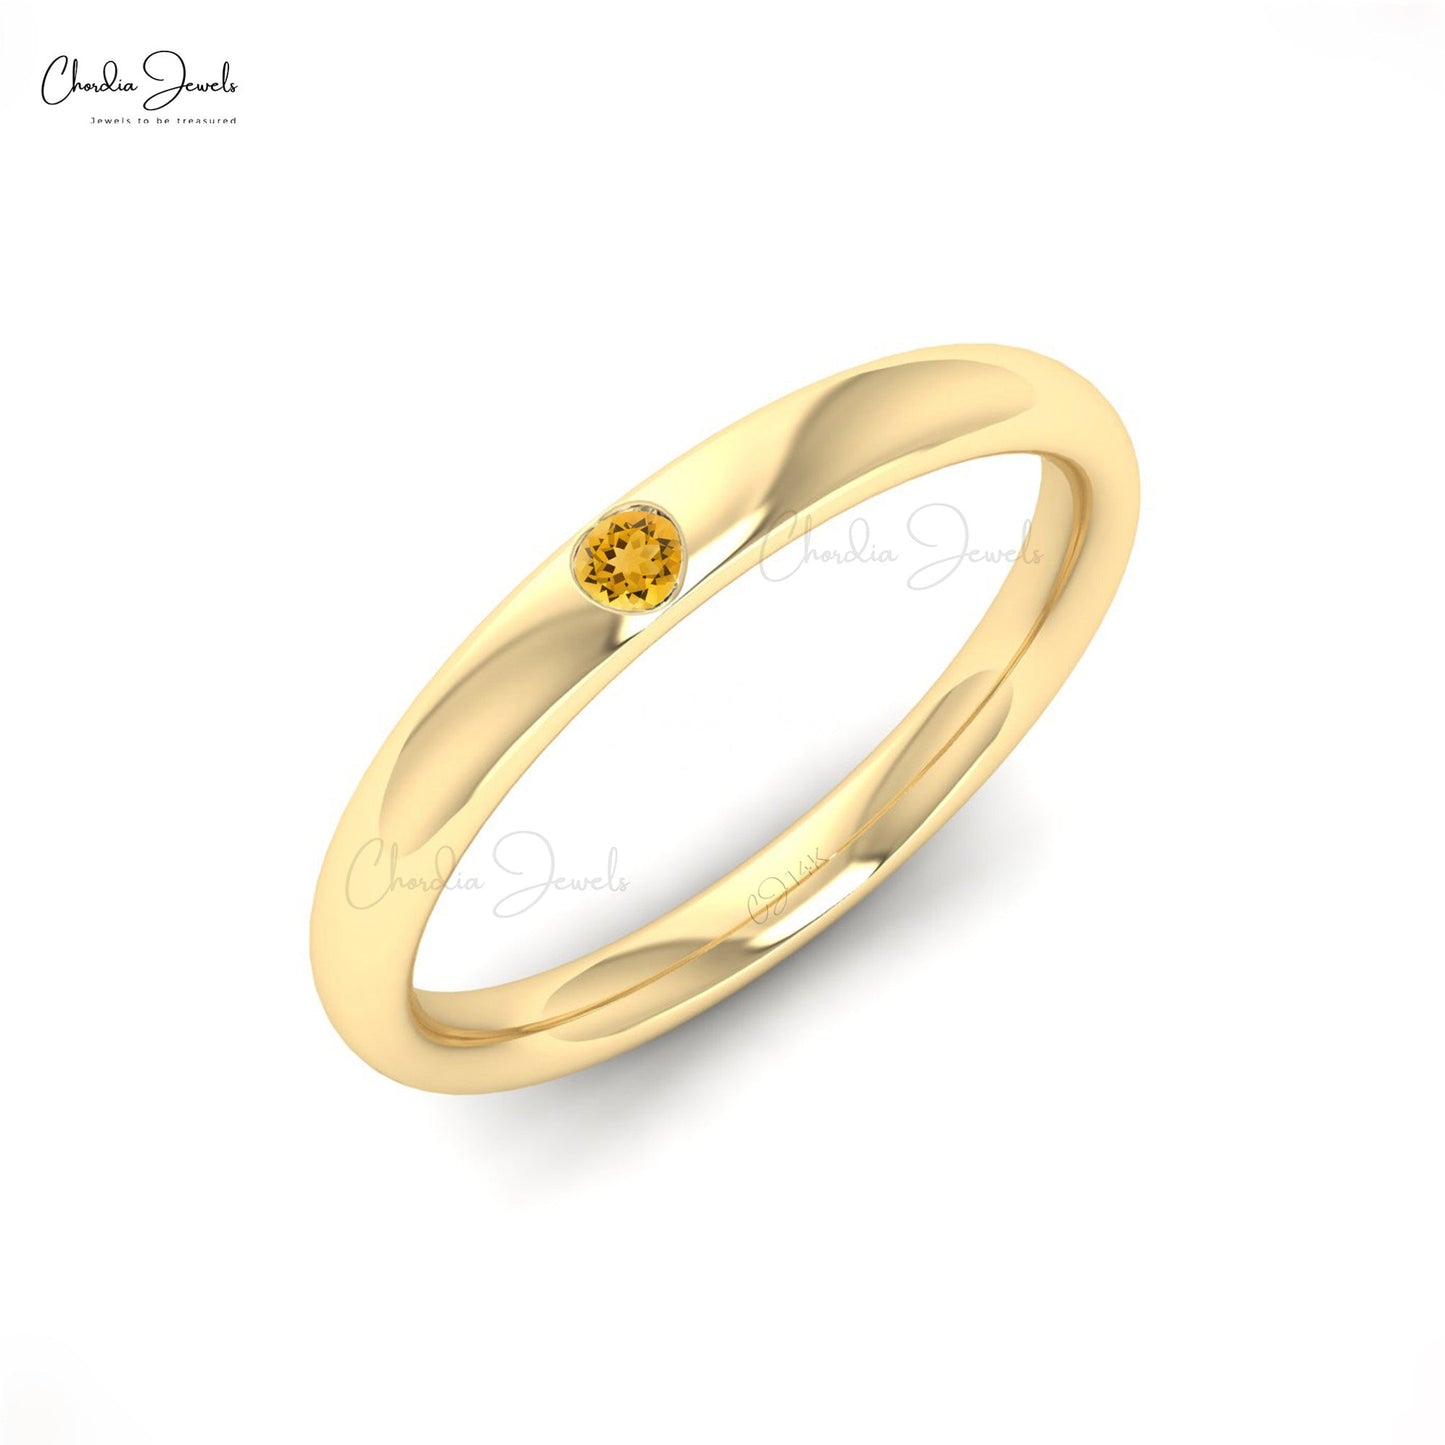 Simple Design Round Cut Stone Clear Quartz Gold Plated Adjustable Ring For  Women | eBay